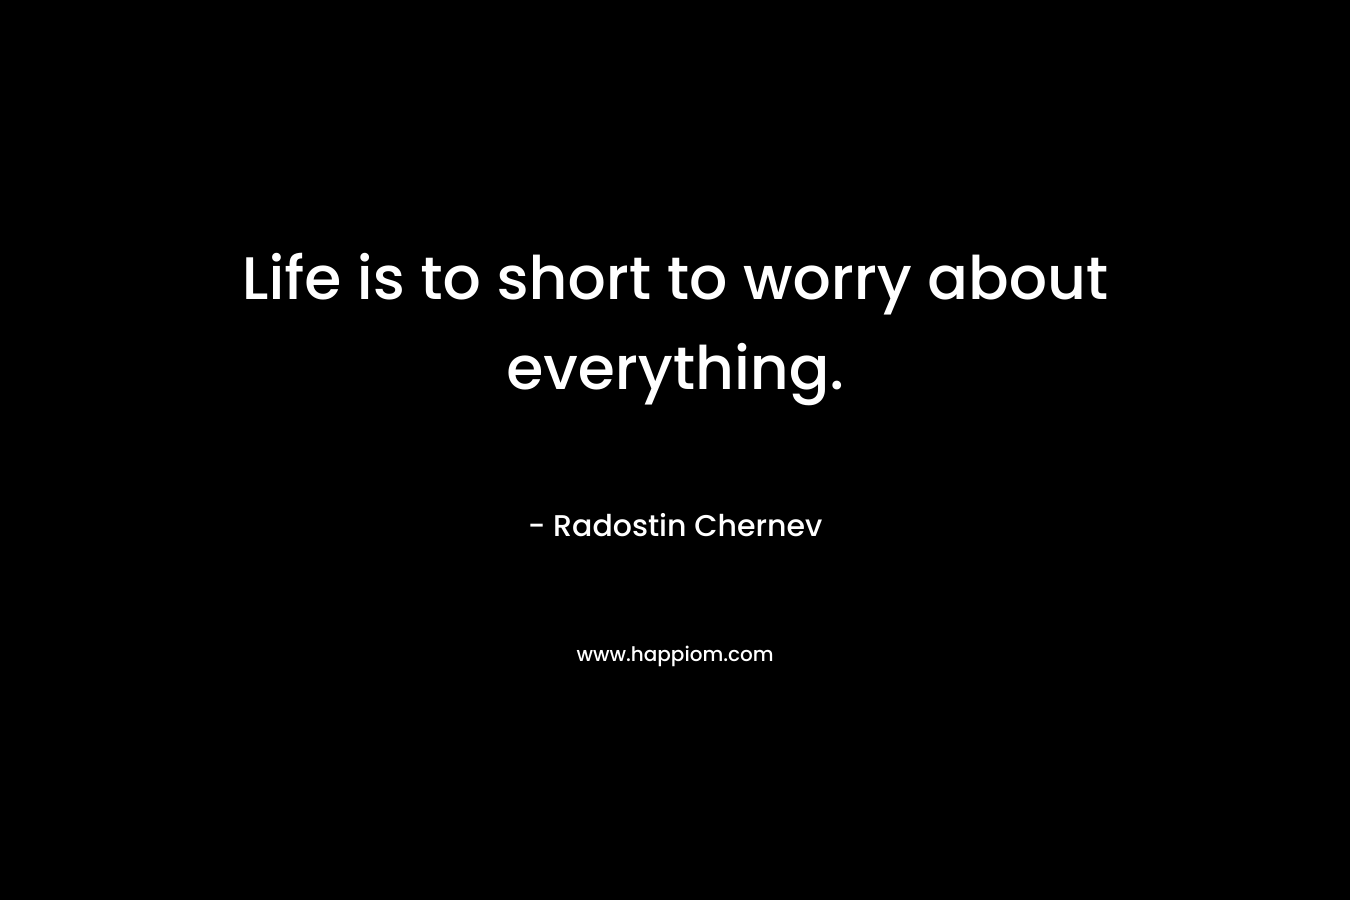 Life is to short to worry about everything. – Radostin Chernev